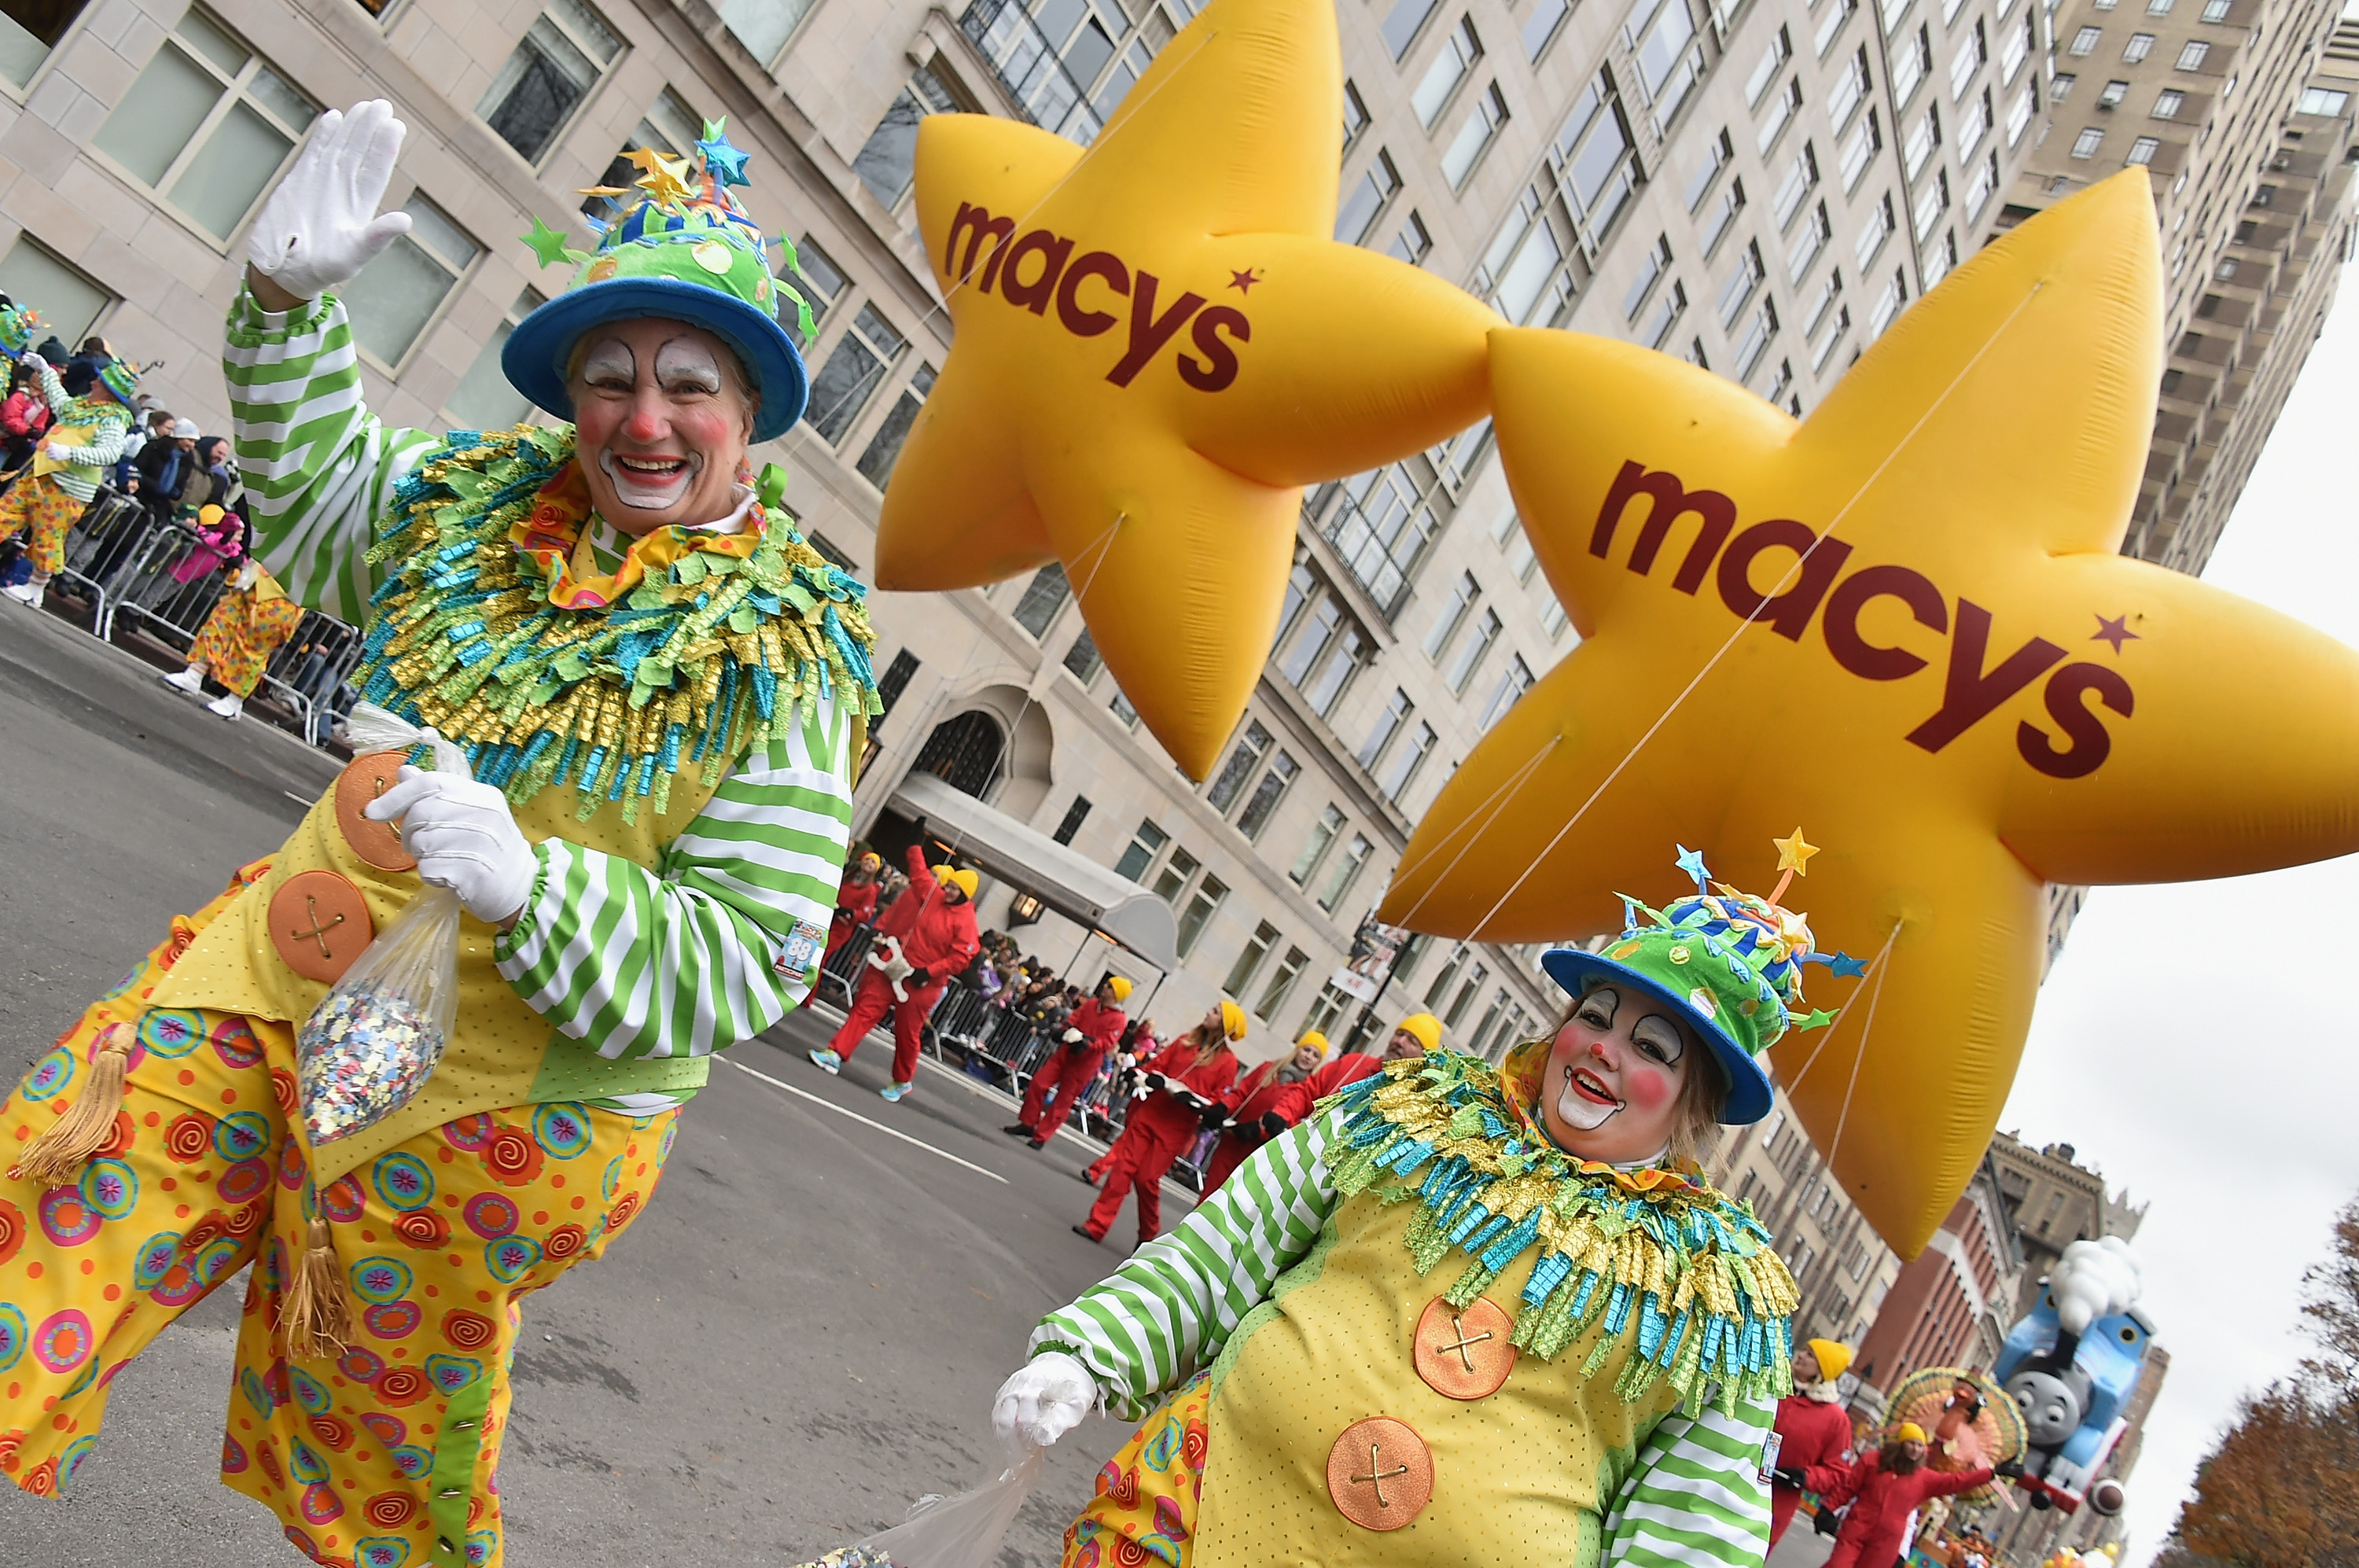 Macy’s Thanksgiving Day Parade 2015 Live Stream Watch Online | Heavy.com - Streaming The Macy's Thanksgiving Parade For Free